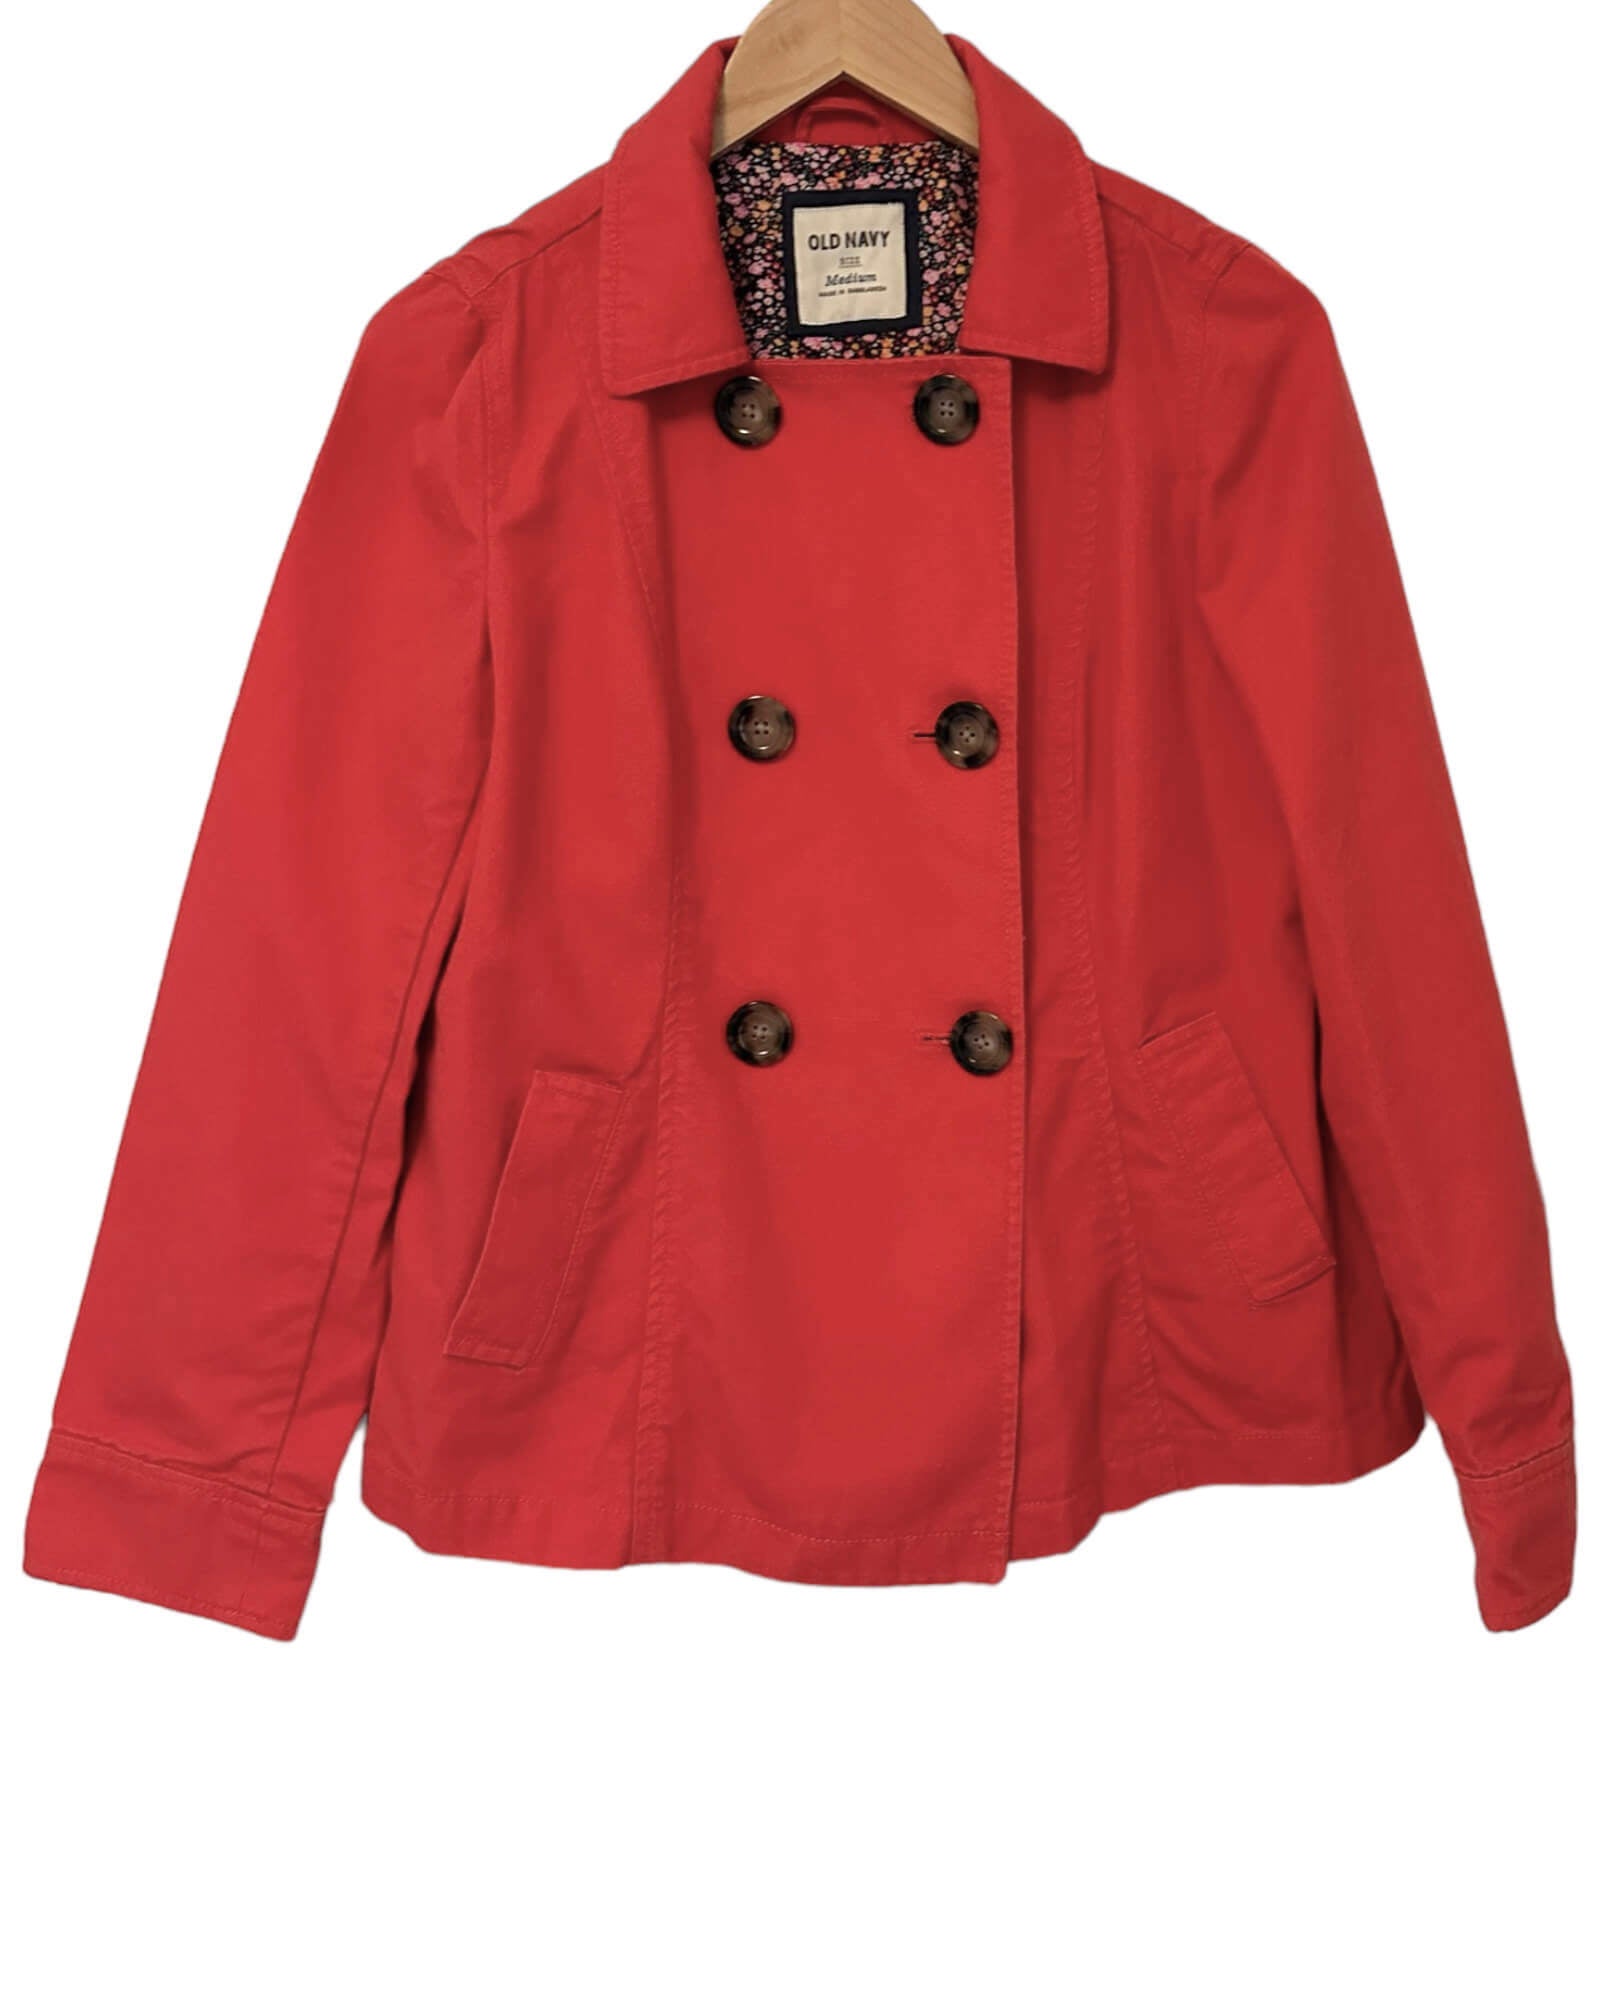 Warm Spring OLD NAVY rowanberry red twill peacoat 